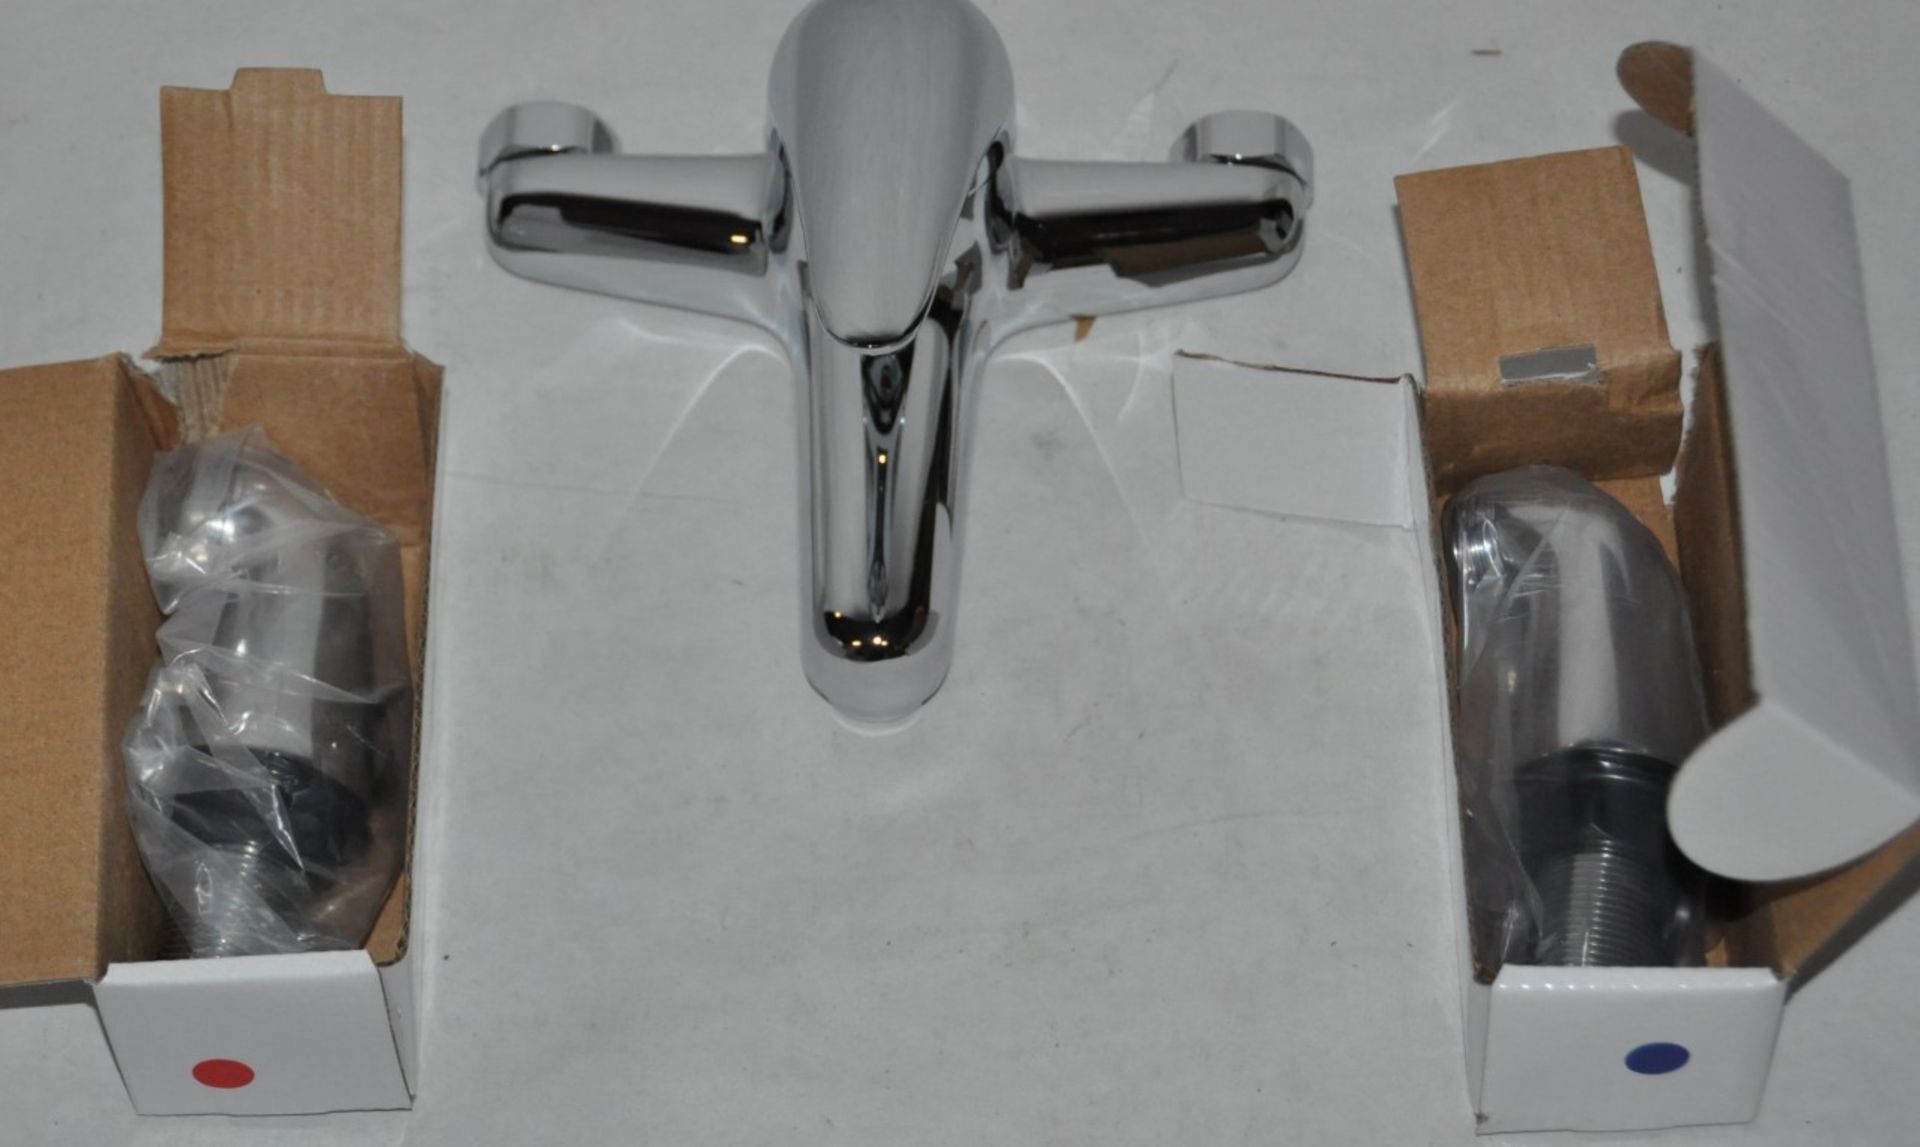 1 x Chrome Bath Filler – Used Commercial Samples - Boxed in Good Condition – Complete – Model : - Image 2 of 4